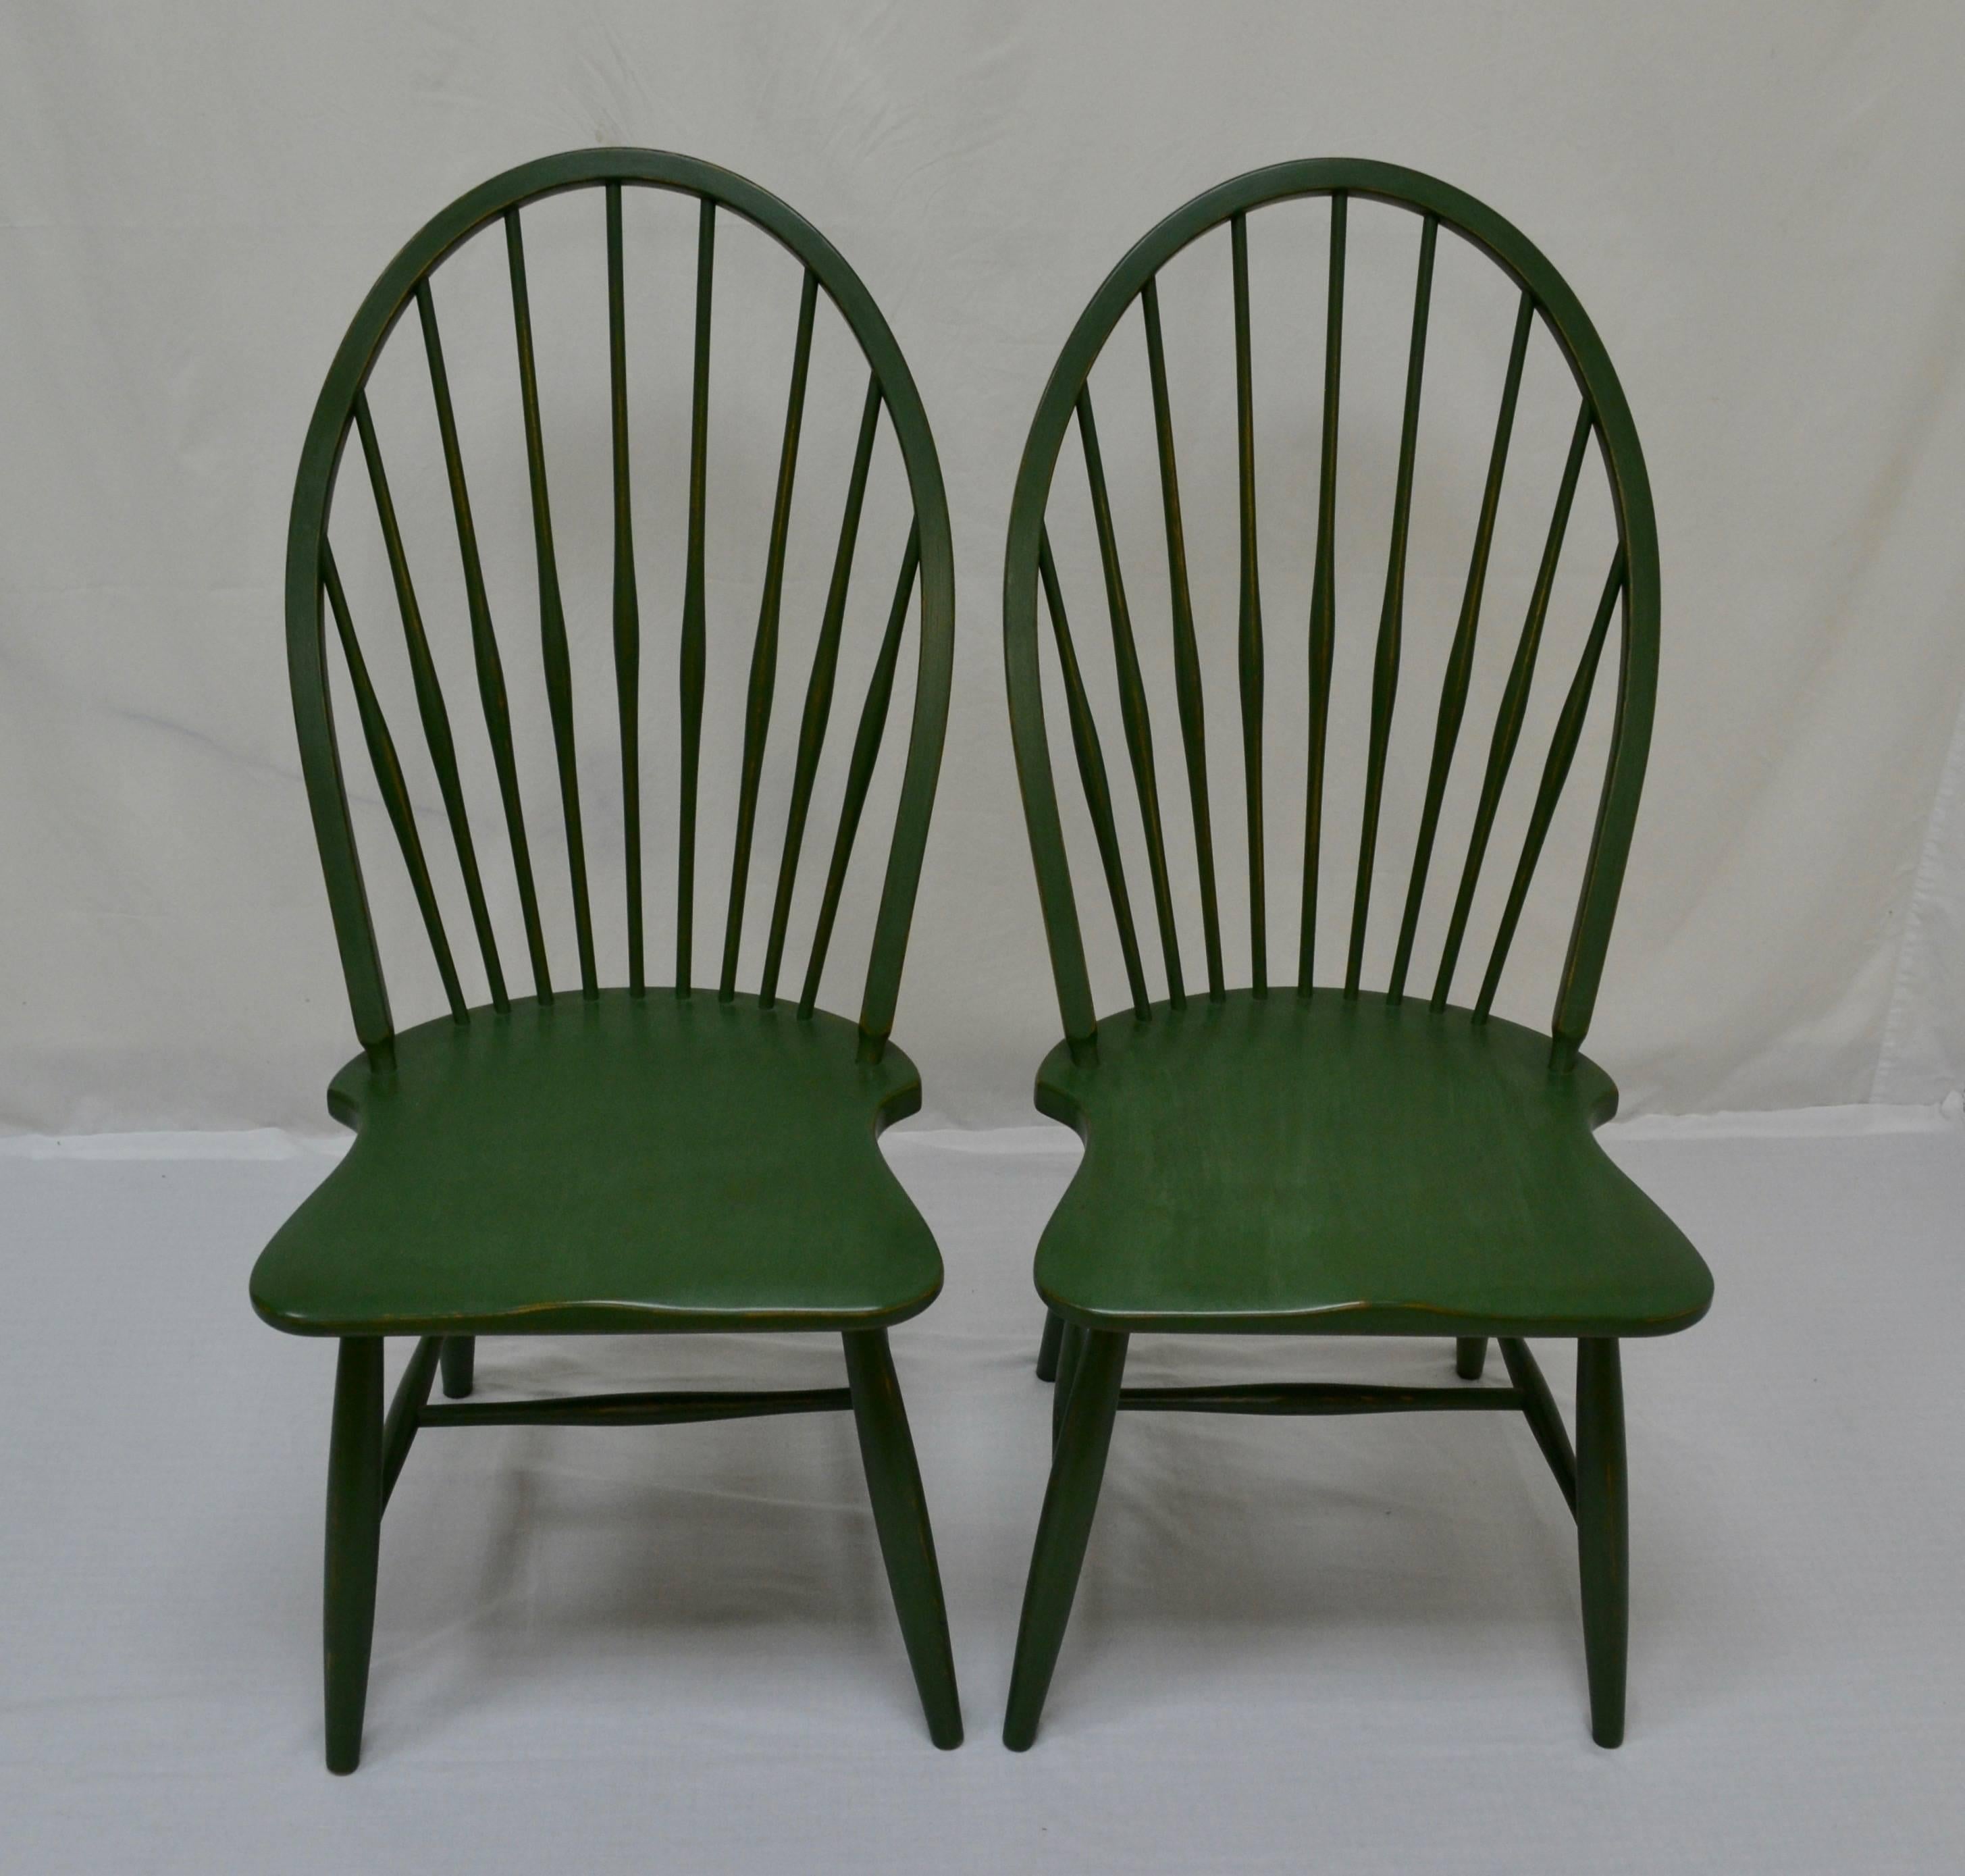 These are faithful beechwood copies of an eighteenth century hoopback Windsor chair, from the beautifully-shaped saddle to the swollen back spindles. They are also extremely sturdy and comfortable. To maintain the spirit of authenticity, we have